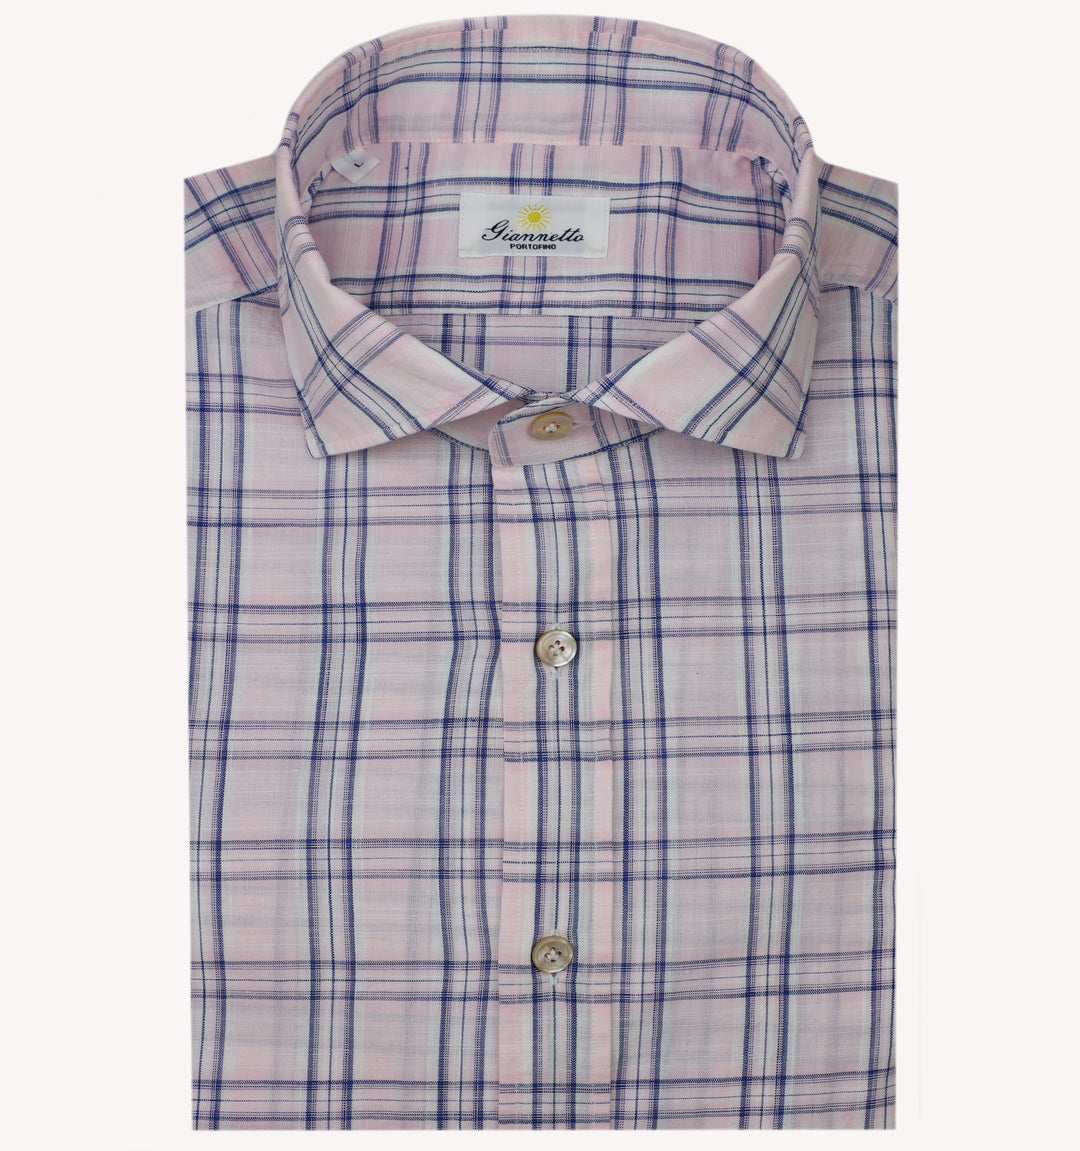 Giannetto Check Sport Shirt in Pink Navy